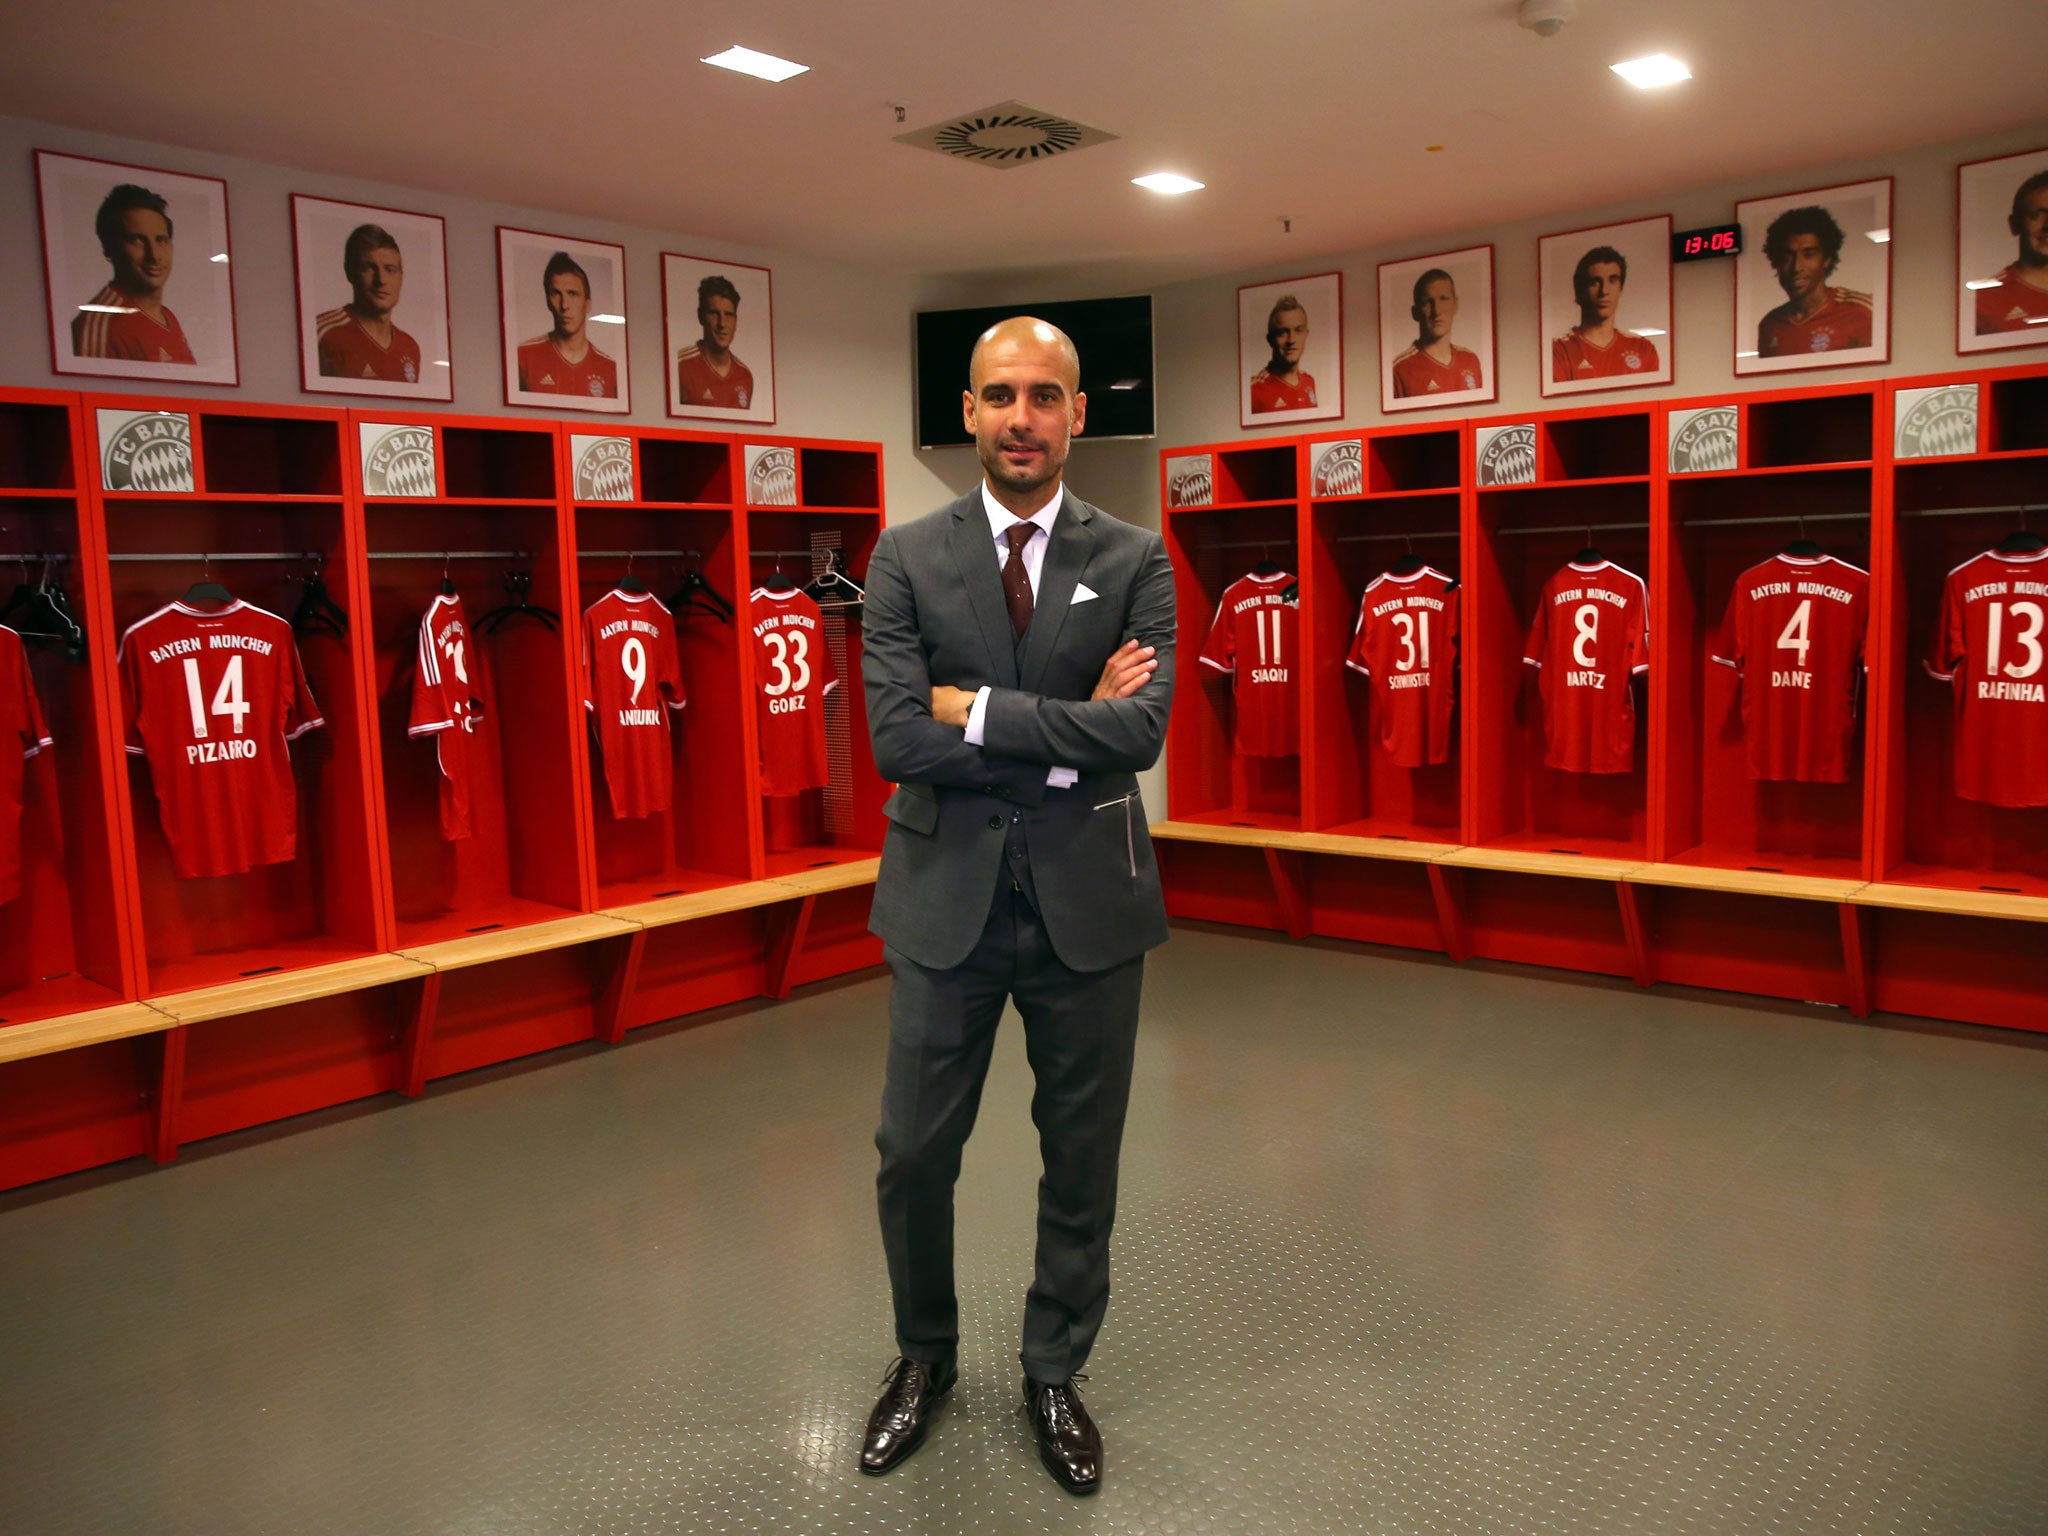 Pep Guardiola will soon have his very own changing room separate from the rest of the playing squad